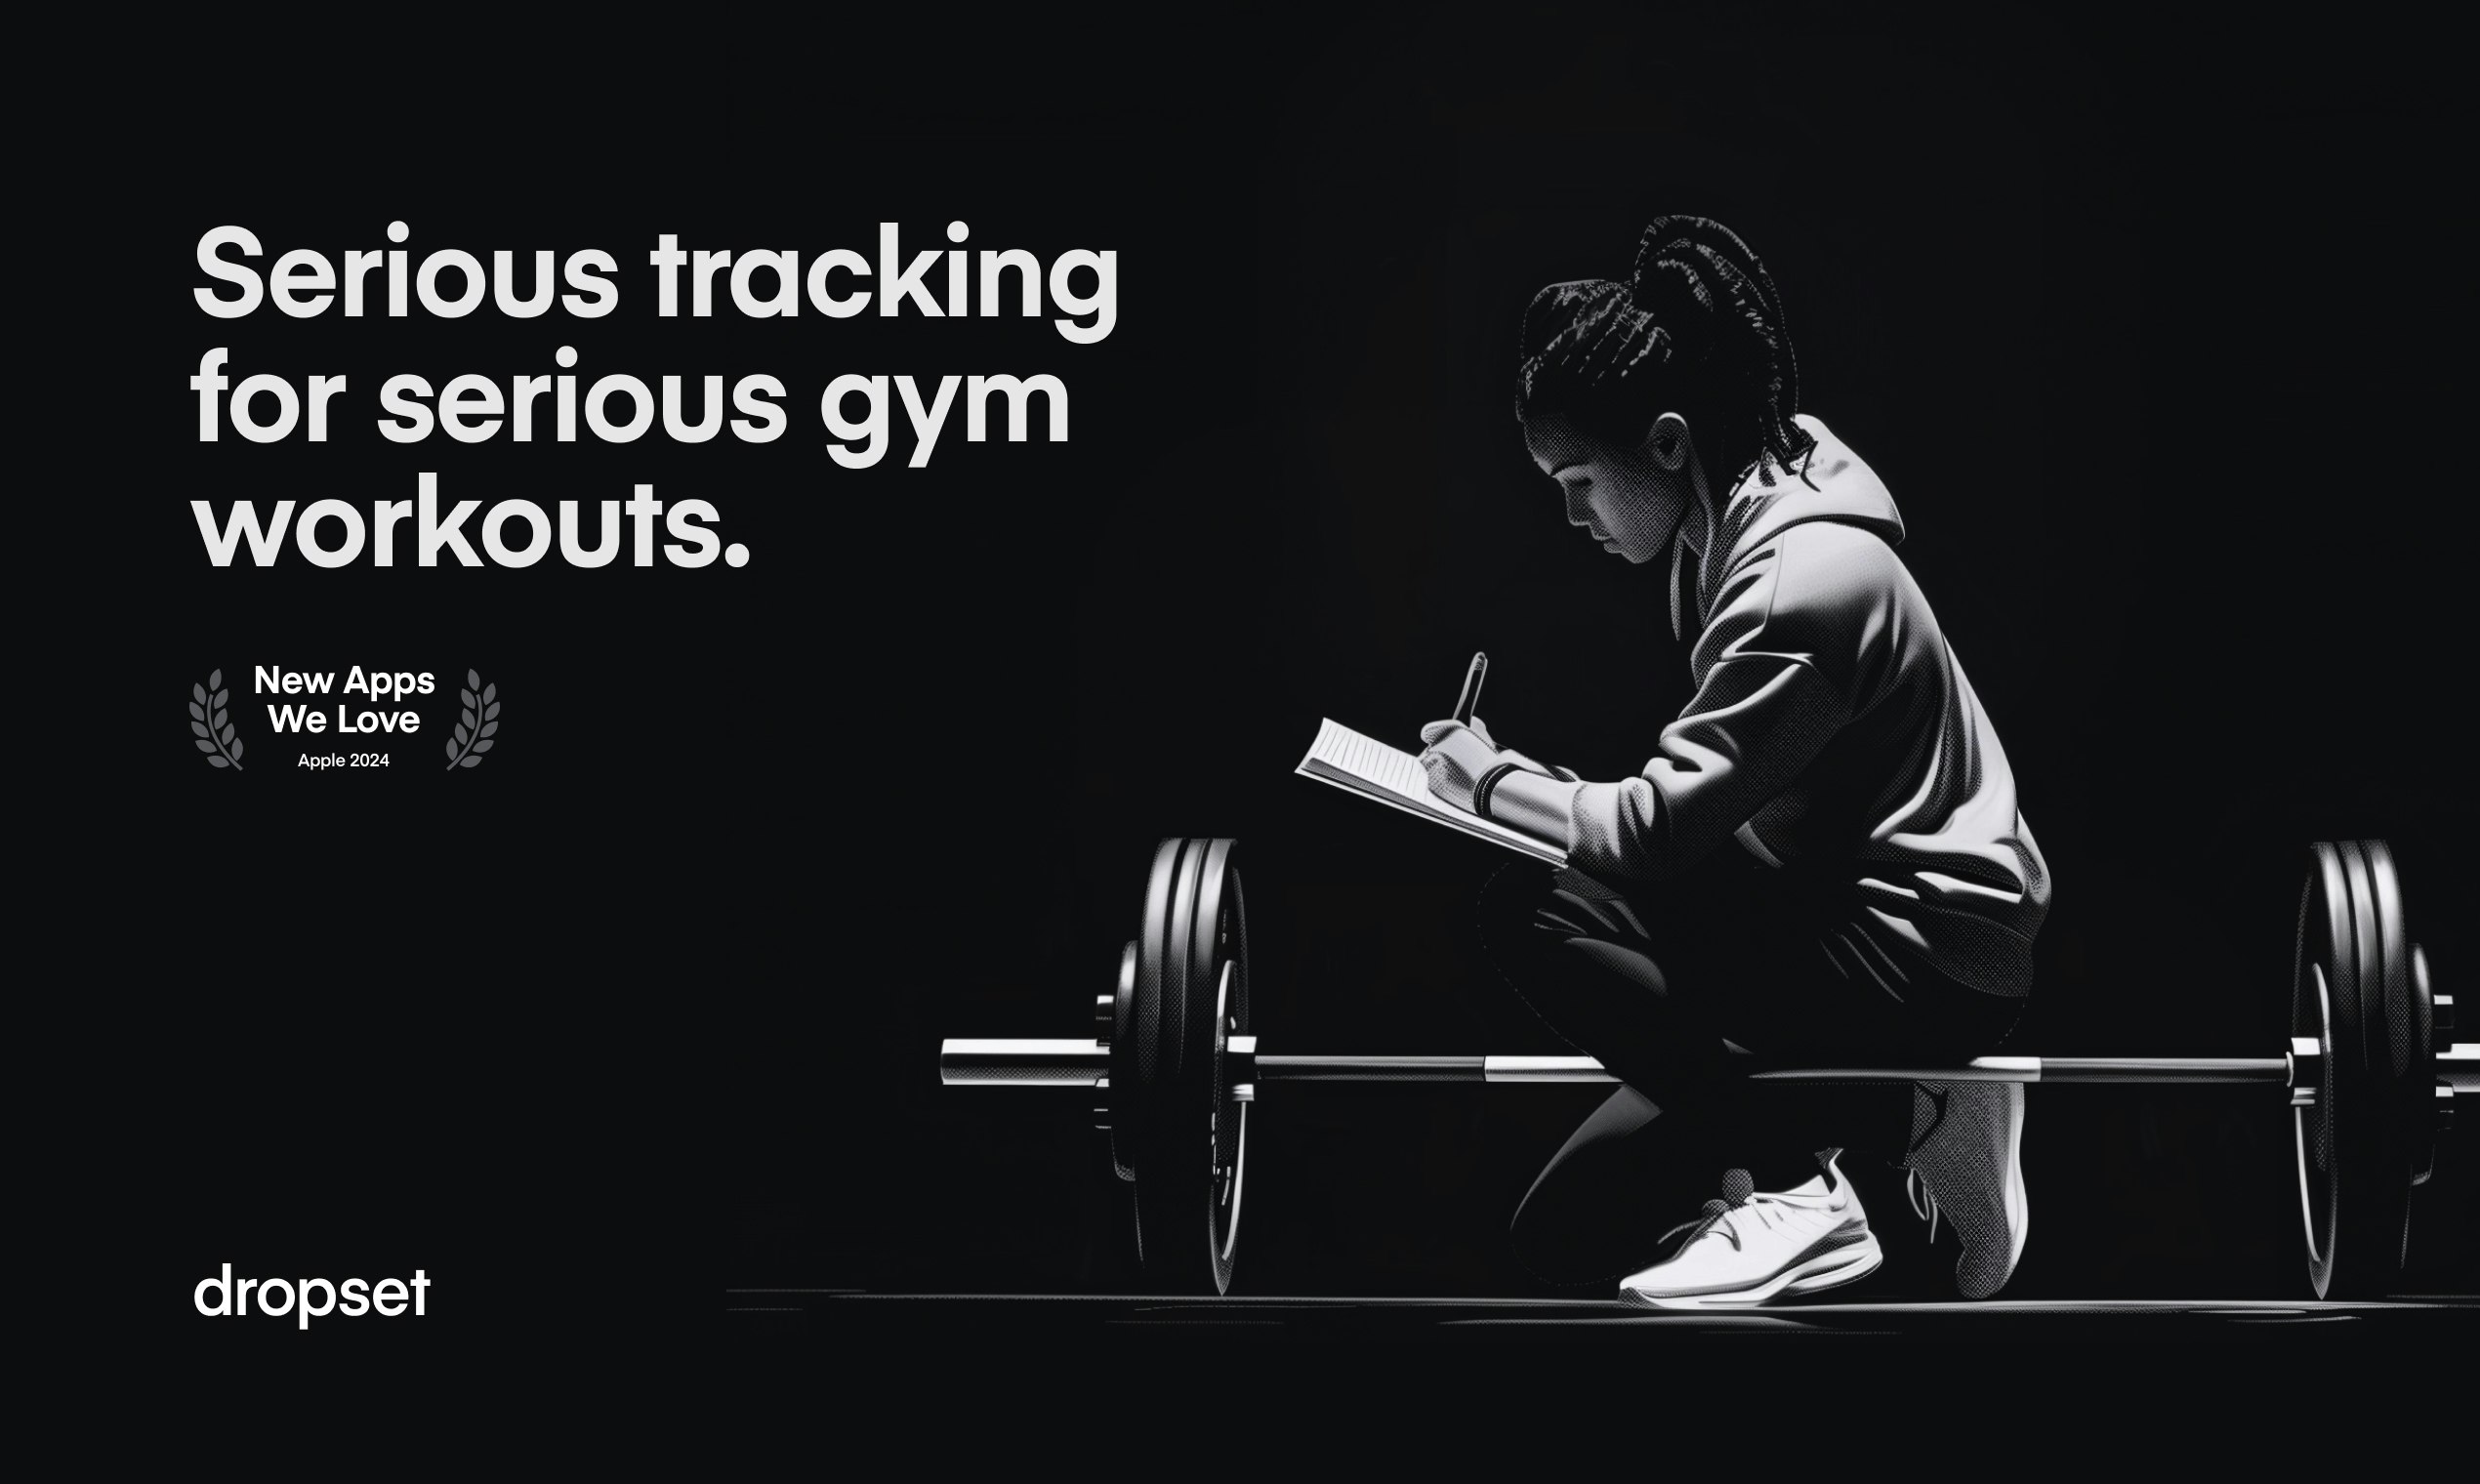 dropset - Serious tracking for serious gym workouts